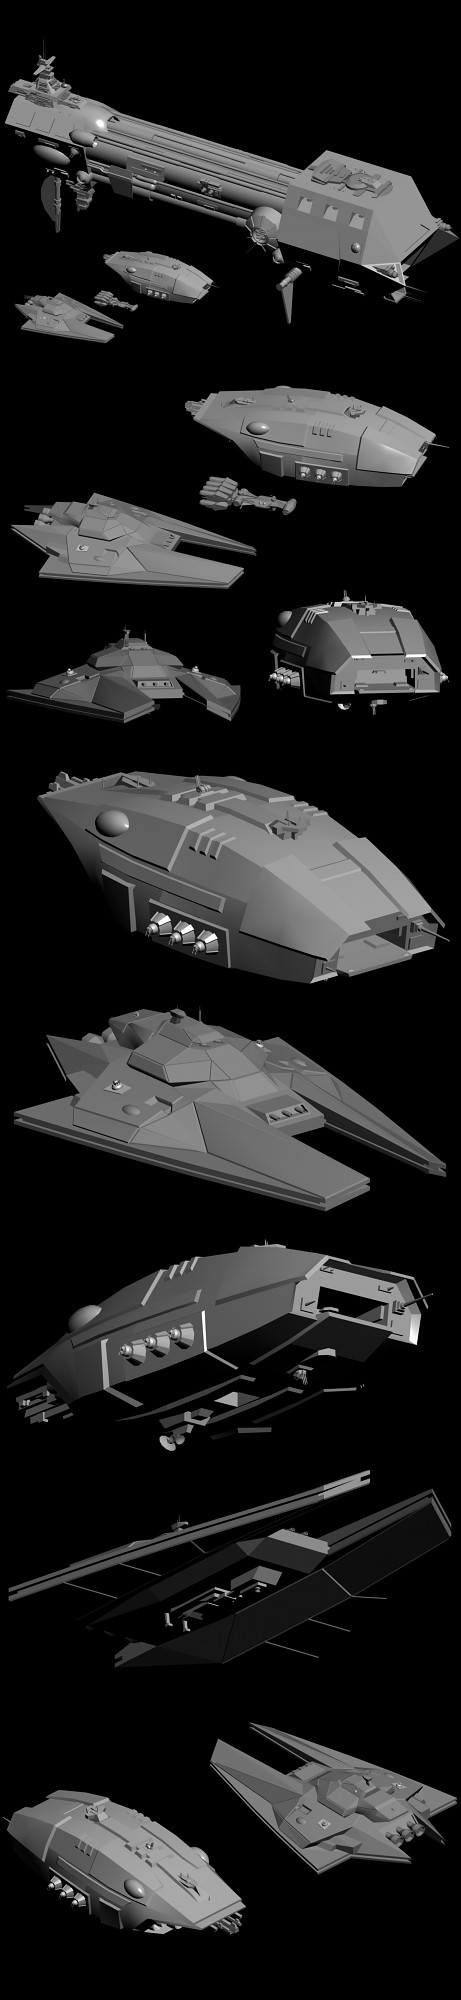 Broadside Cruiser and Imperial Escort Carrier